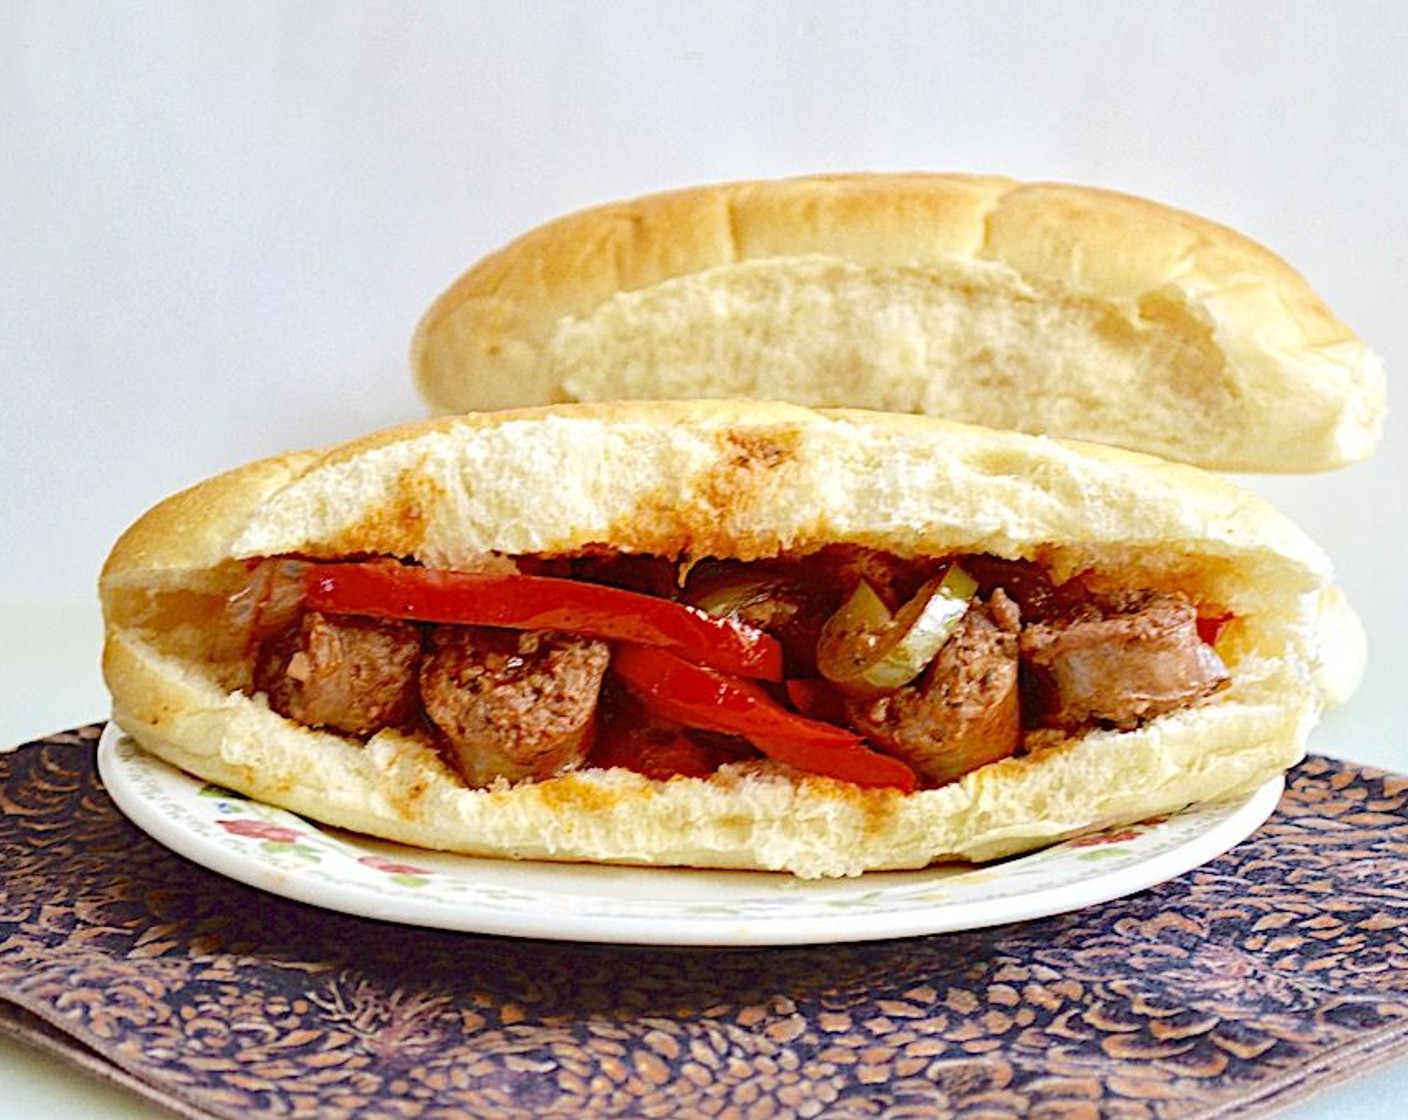 Sausage, Pepper and Onion Sandwiches